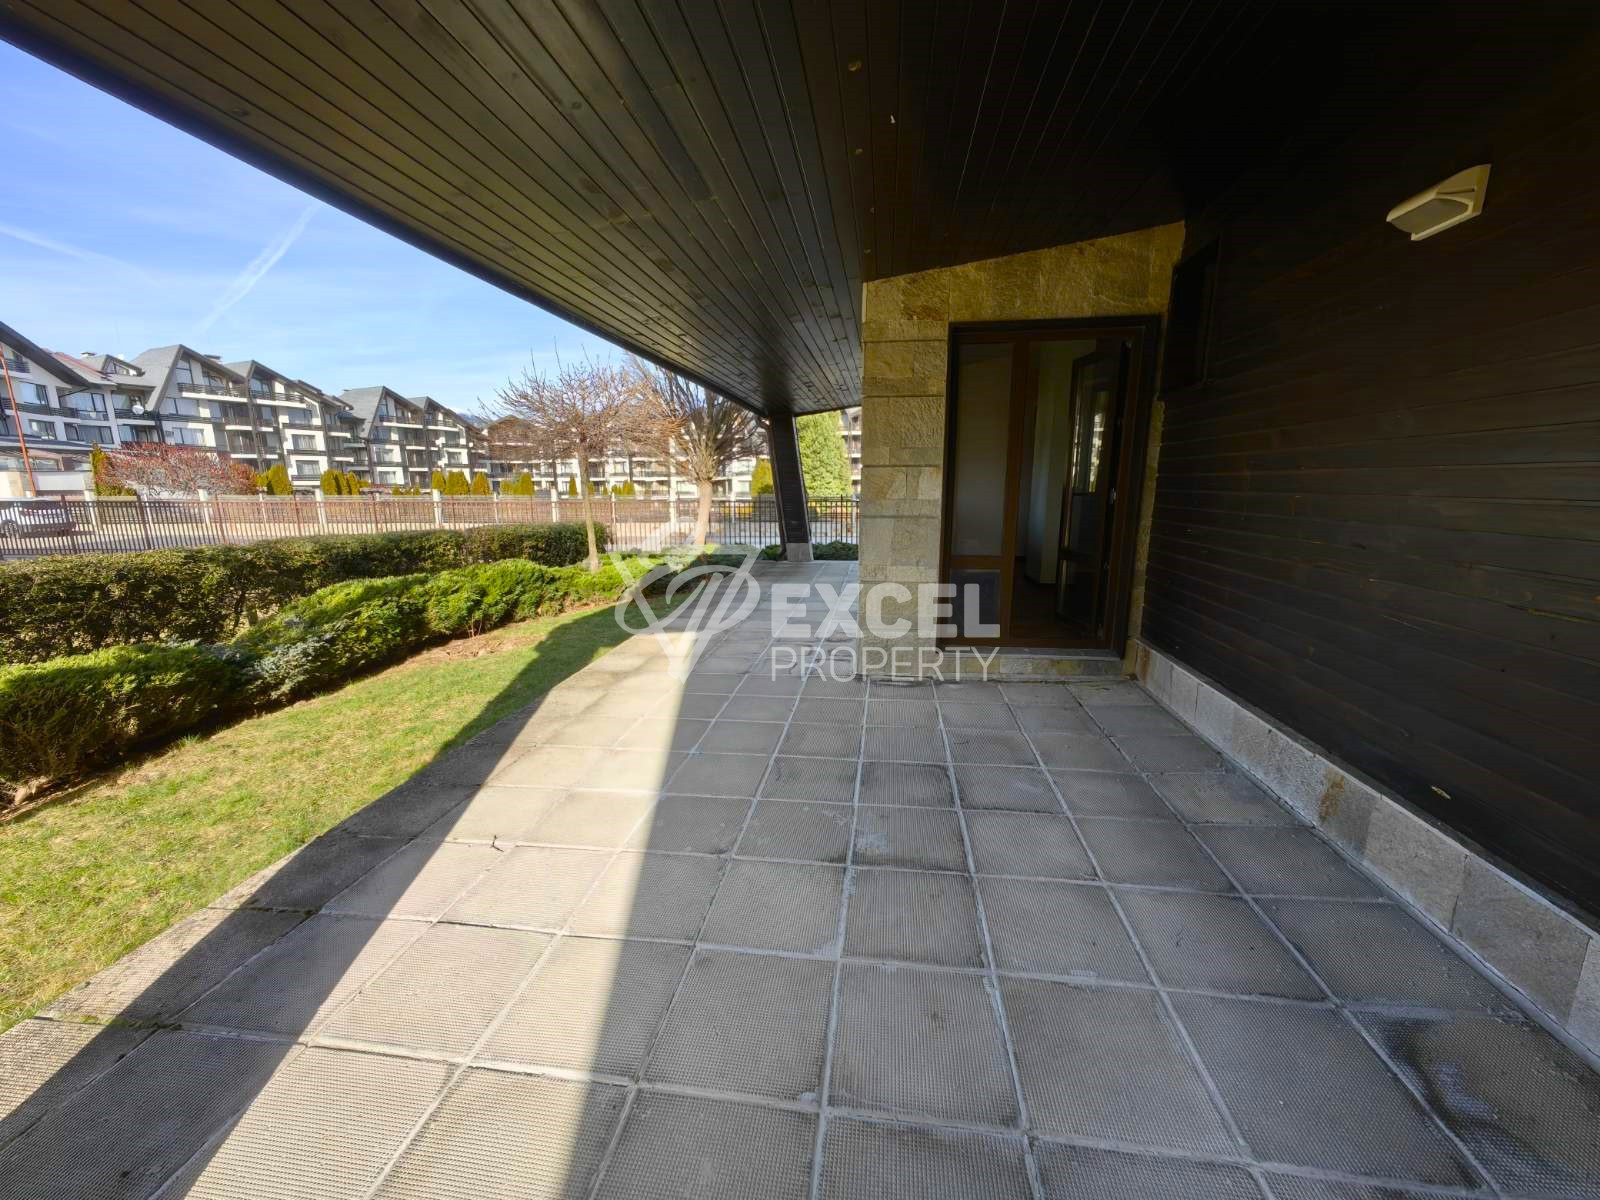 Spacious maisonette with own entrance on the ground floor